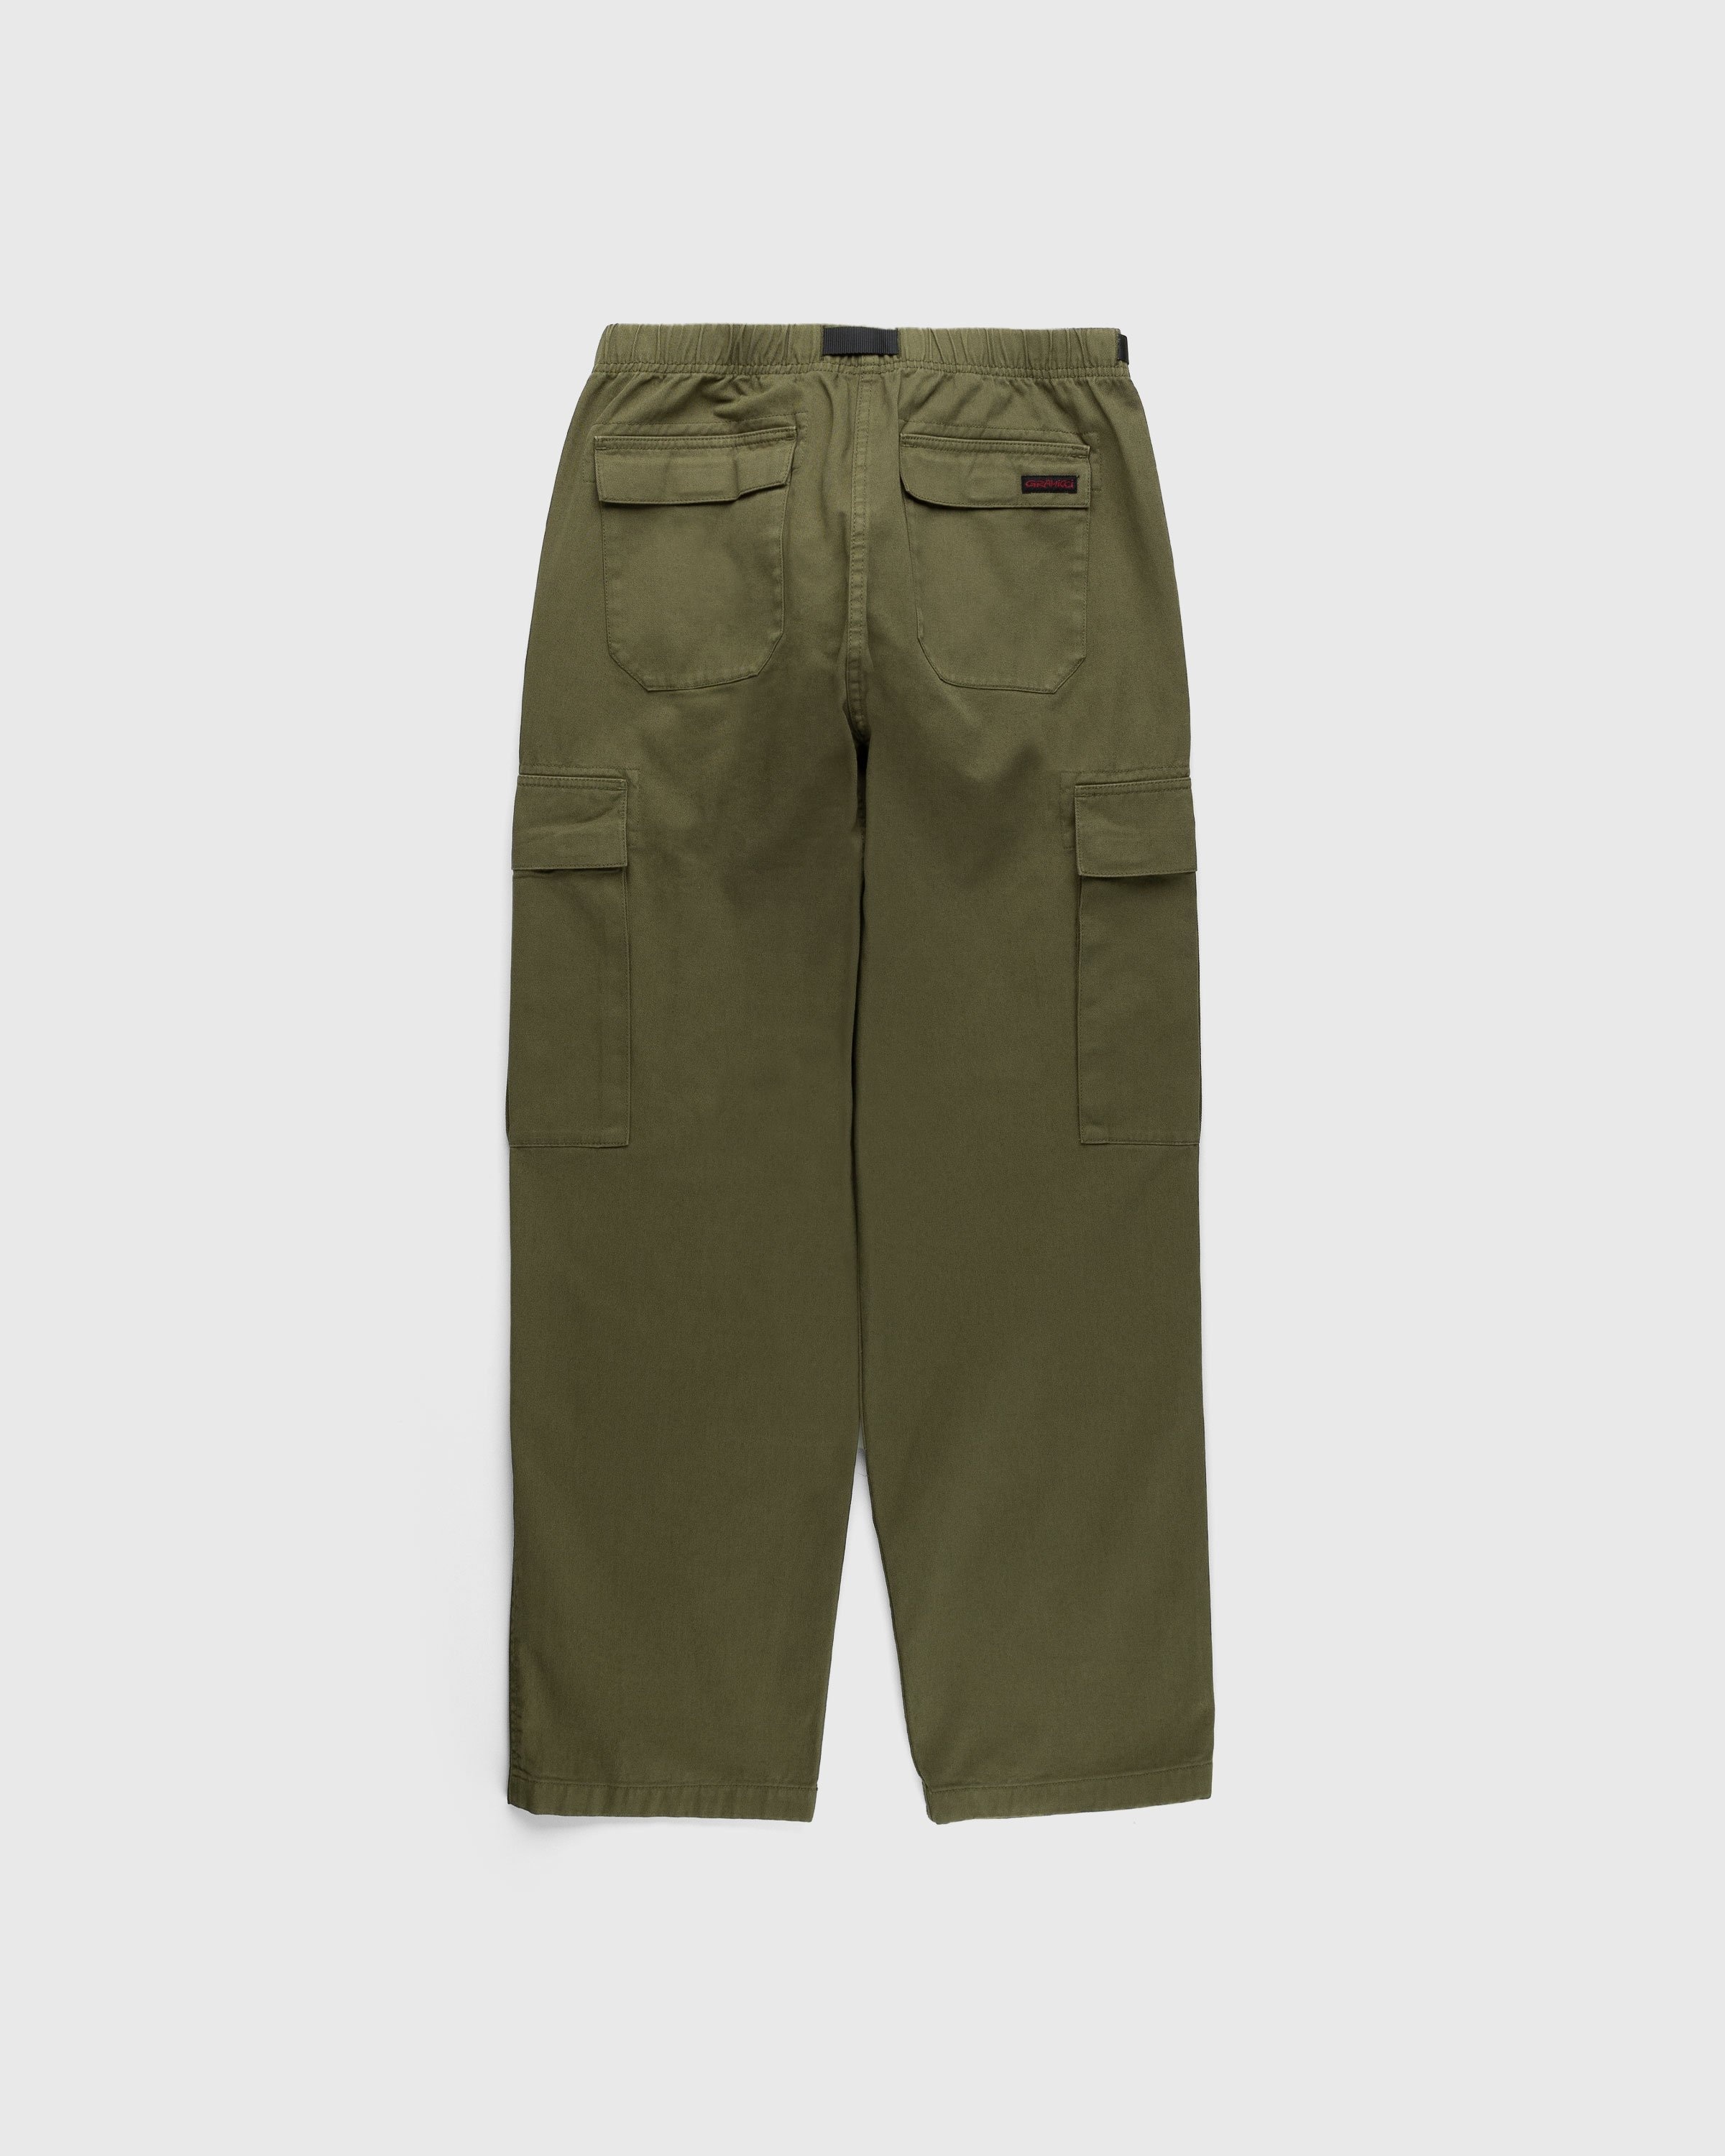 Gramicci – Cargo Pant Olive - Cargo Pants - Green - Image 2